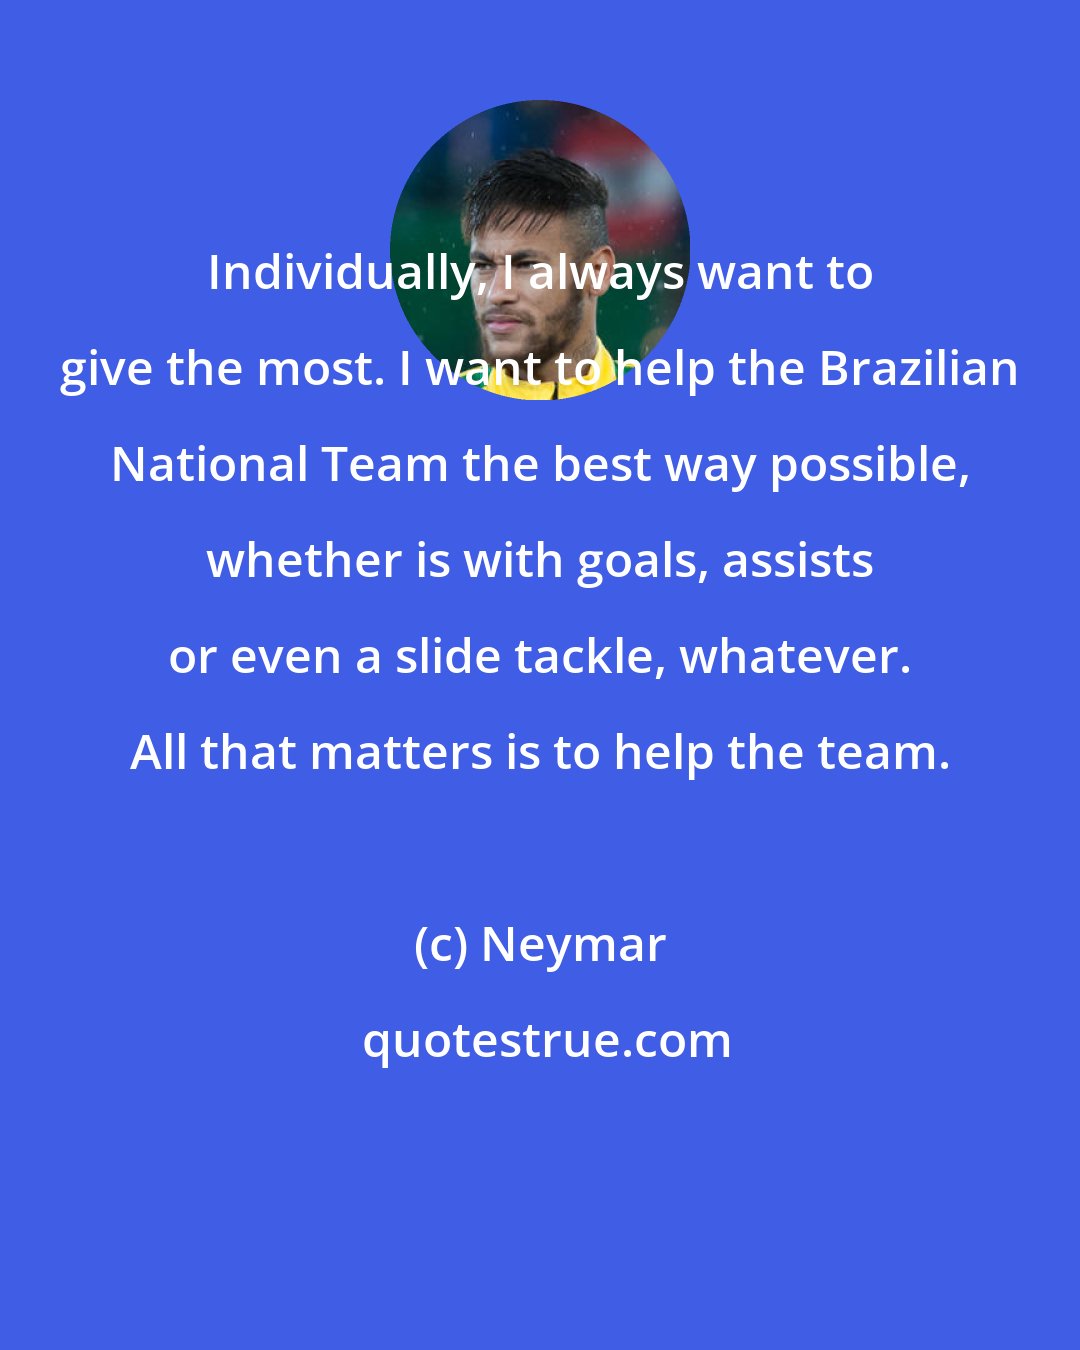 Neymar: Individually, I always want to give the most. I want to help the Brazilian National Team the best way possible, whether is with goals, assists or even a slide tackle, whatever. All that matters is to help the team.